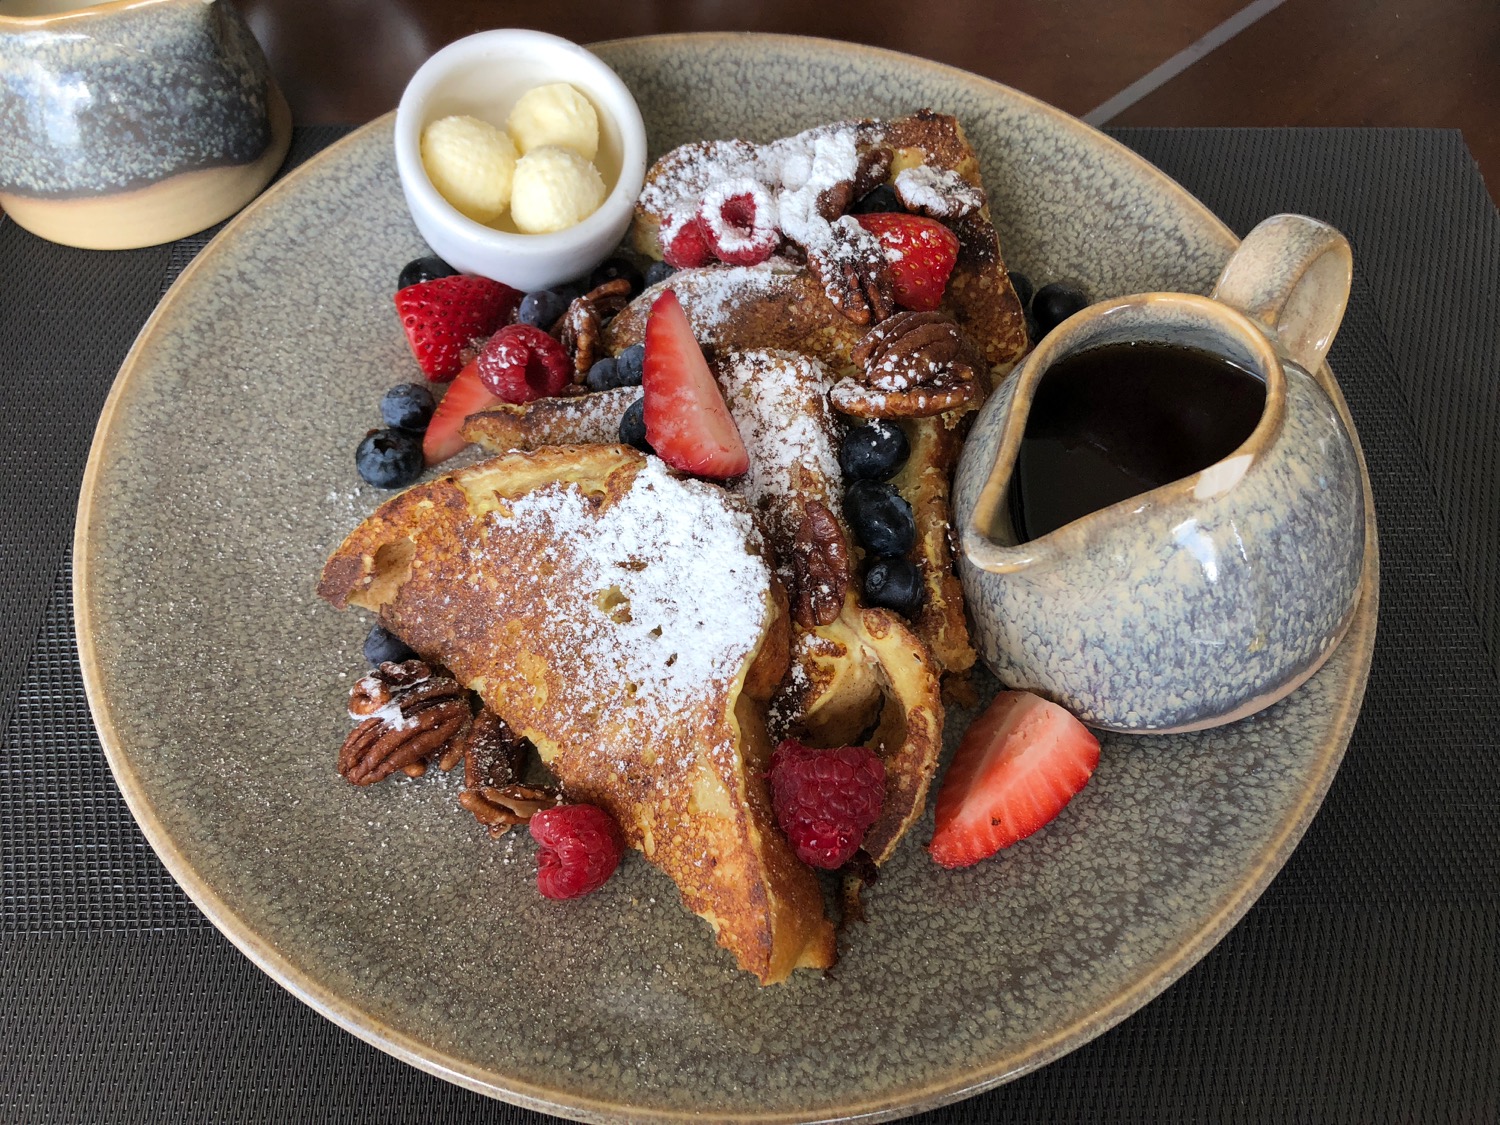 a plate of french toast with berries and nuts